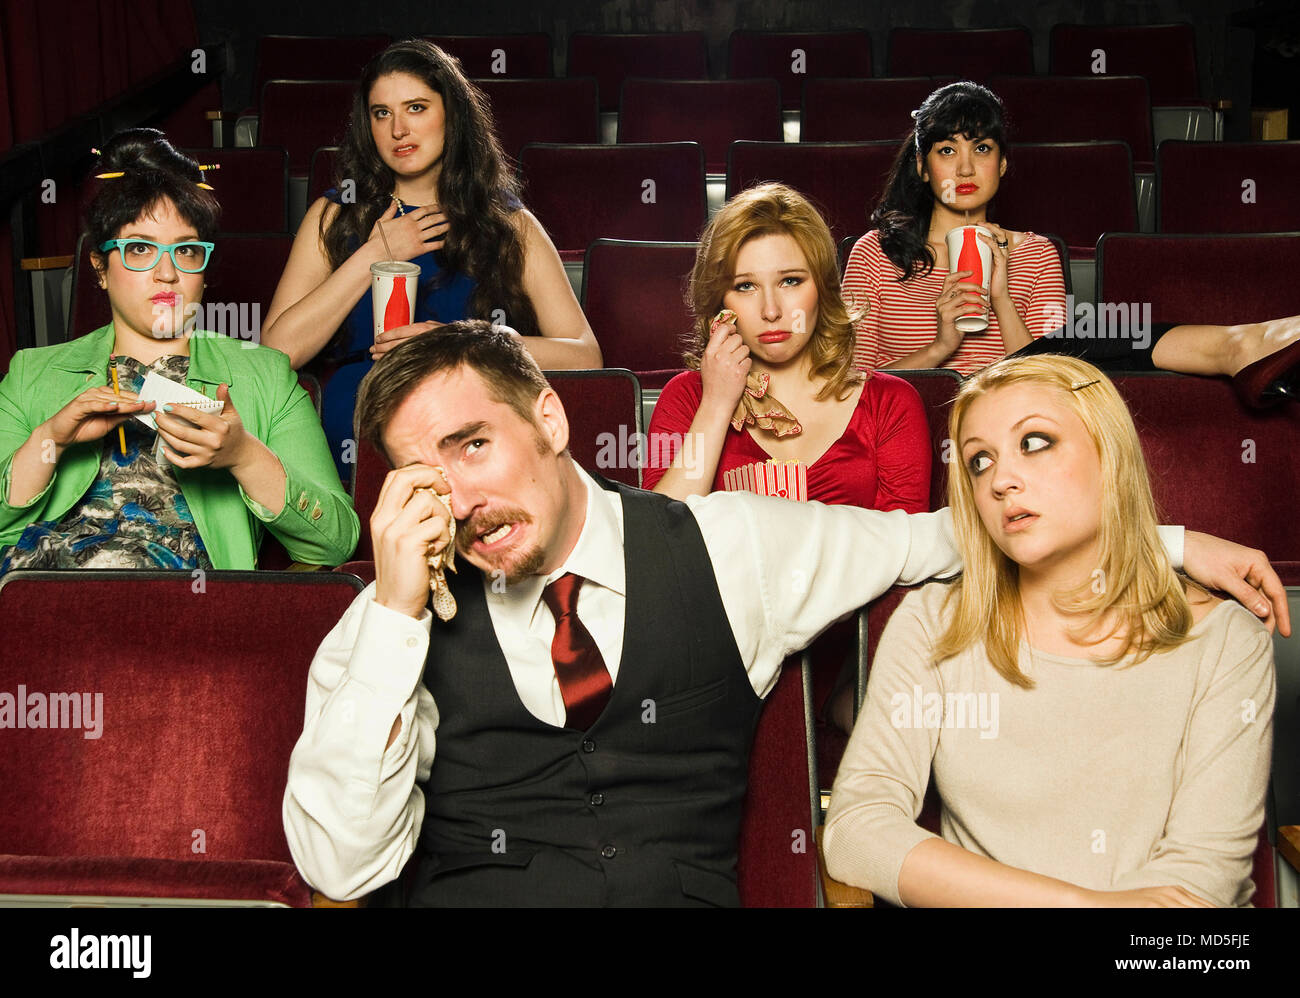 A group of people reacting to a movie in a movie theater. Stock Photo